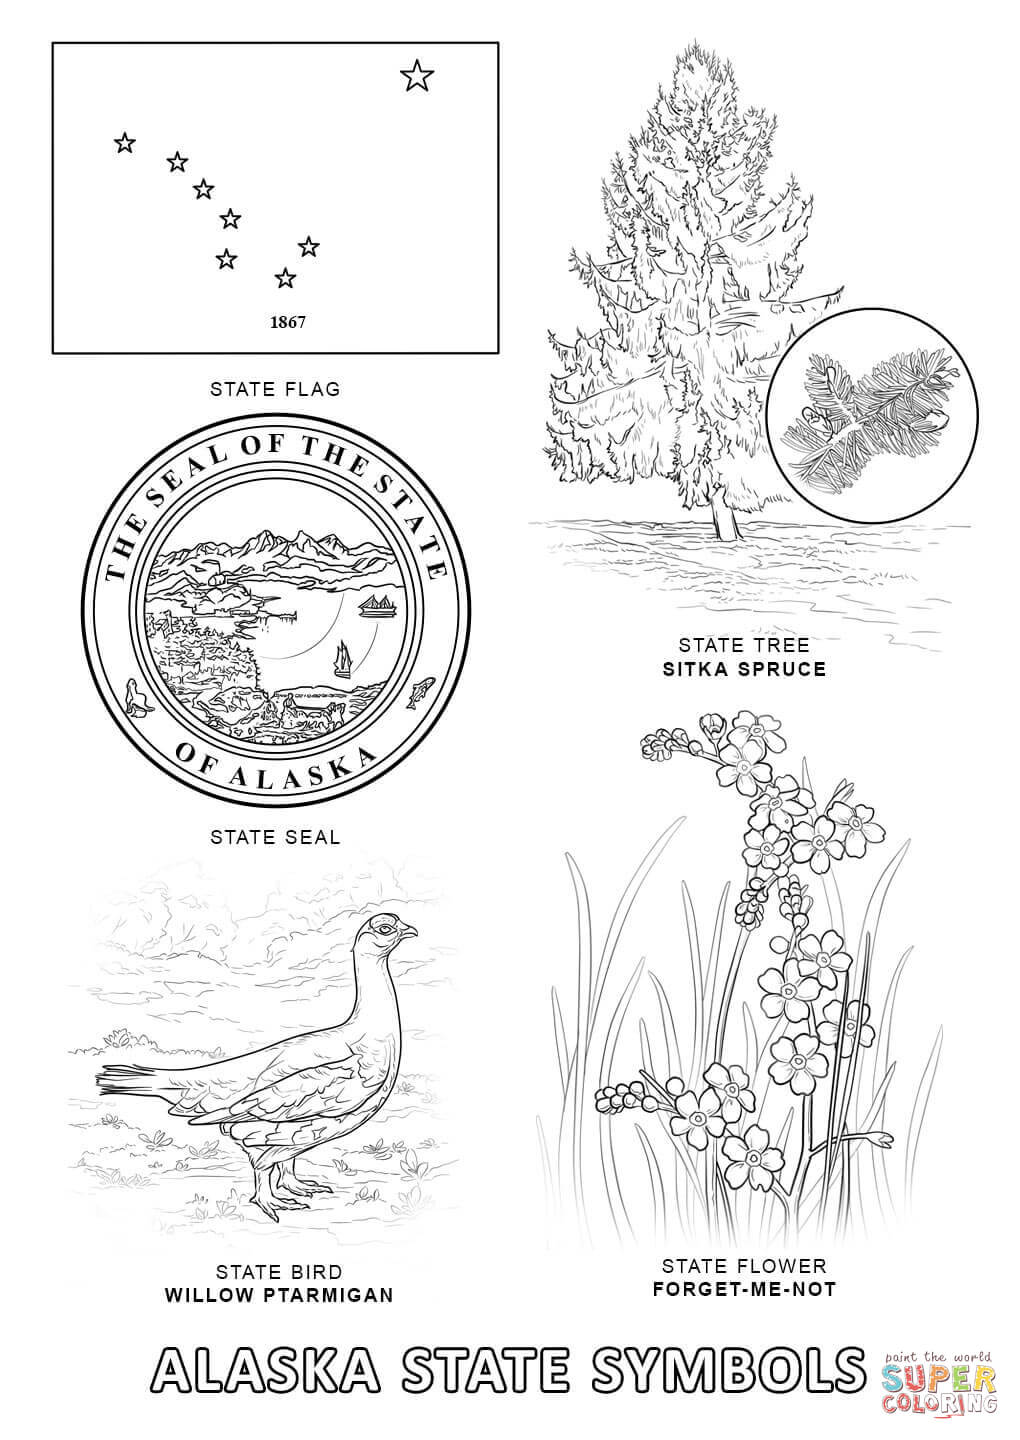 Alaska State Symbols coloring page | Free Printable Coloring Pages